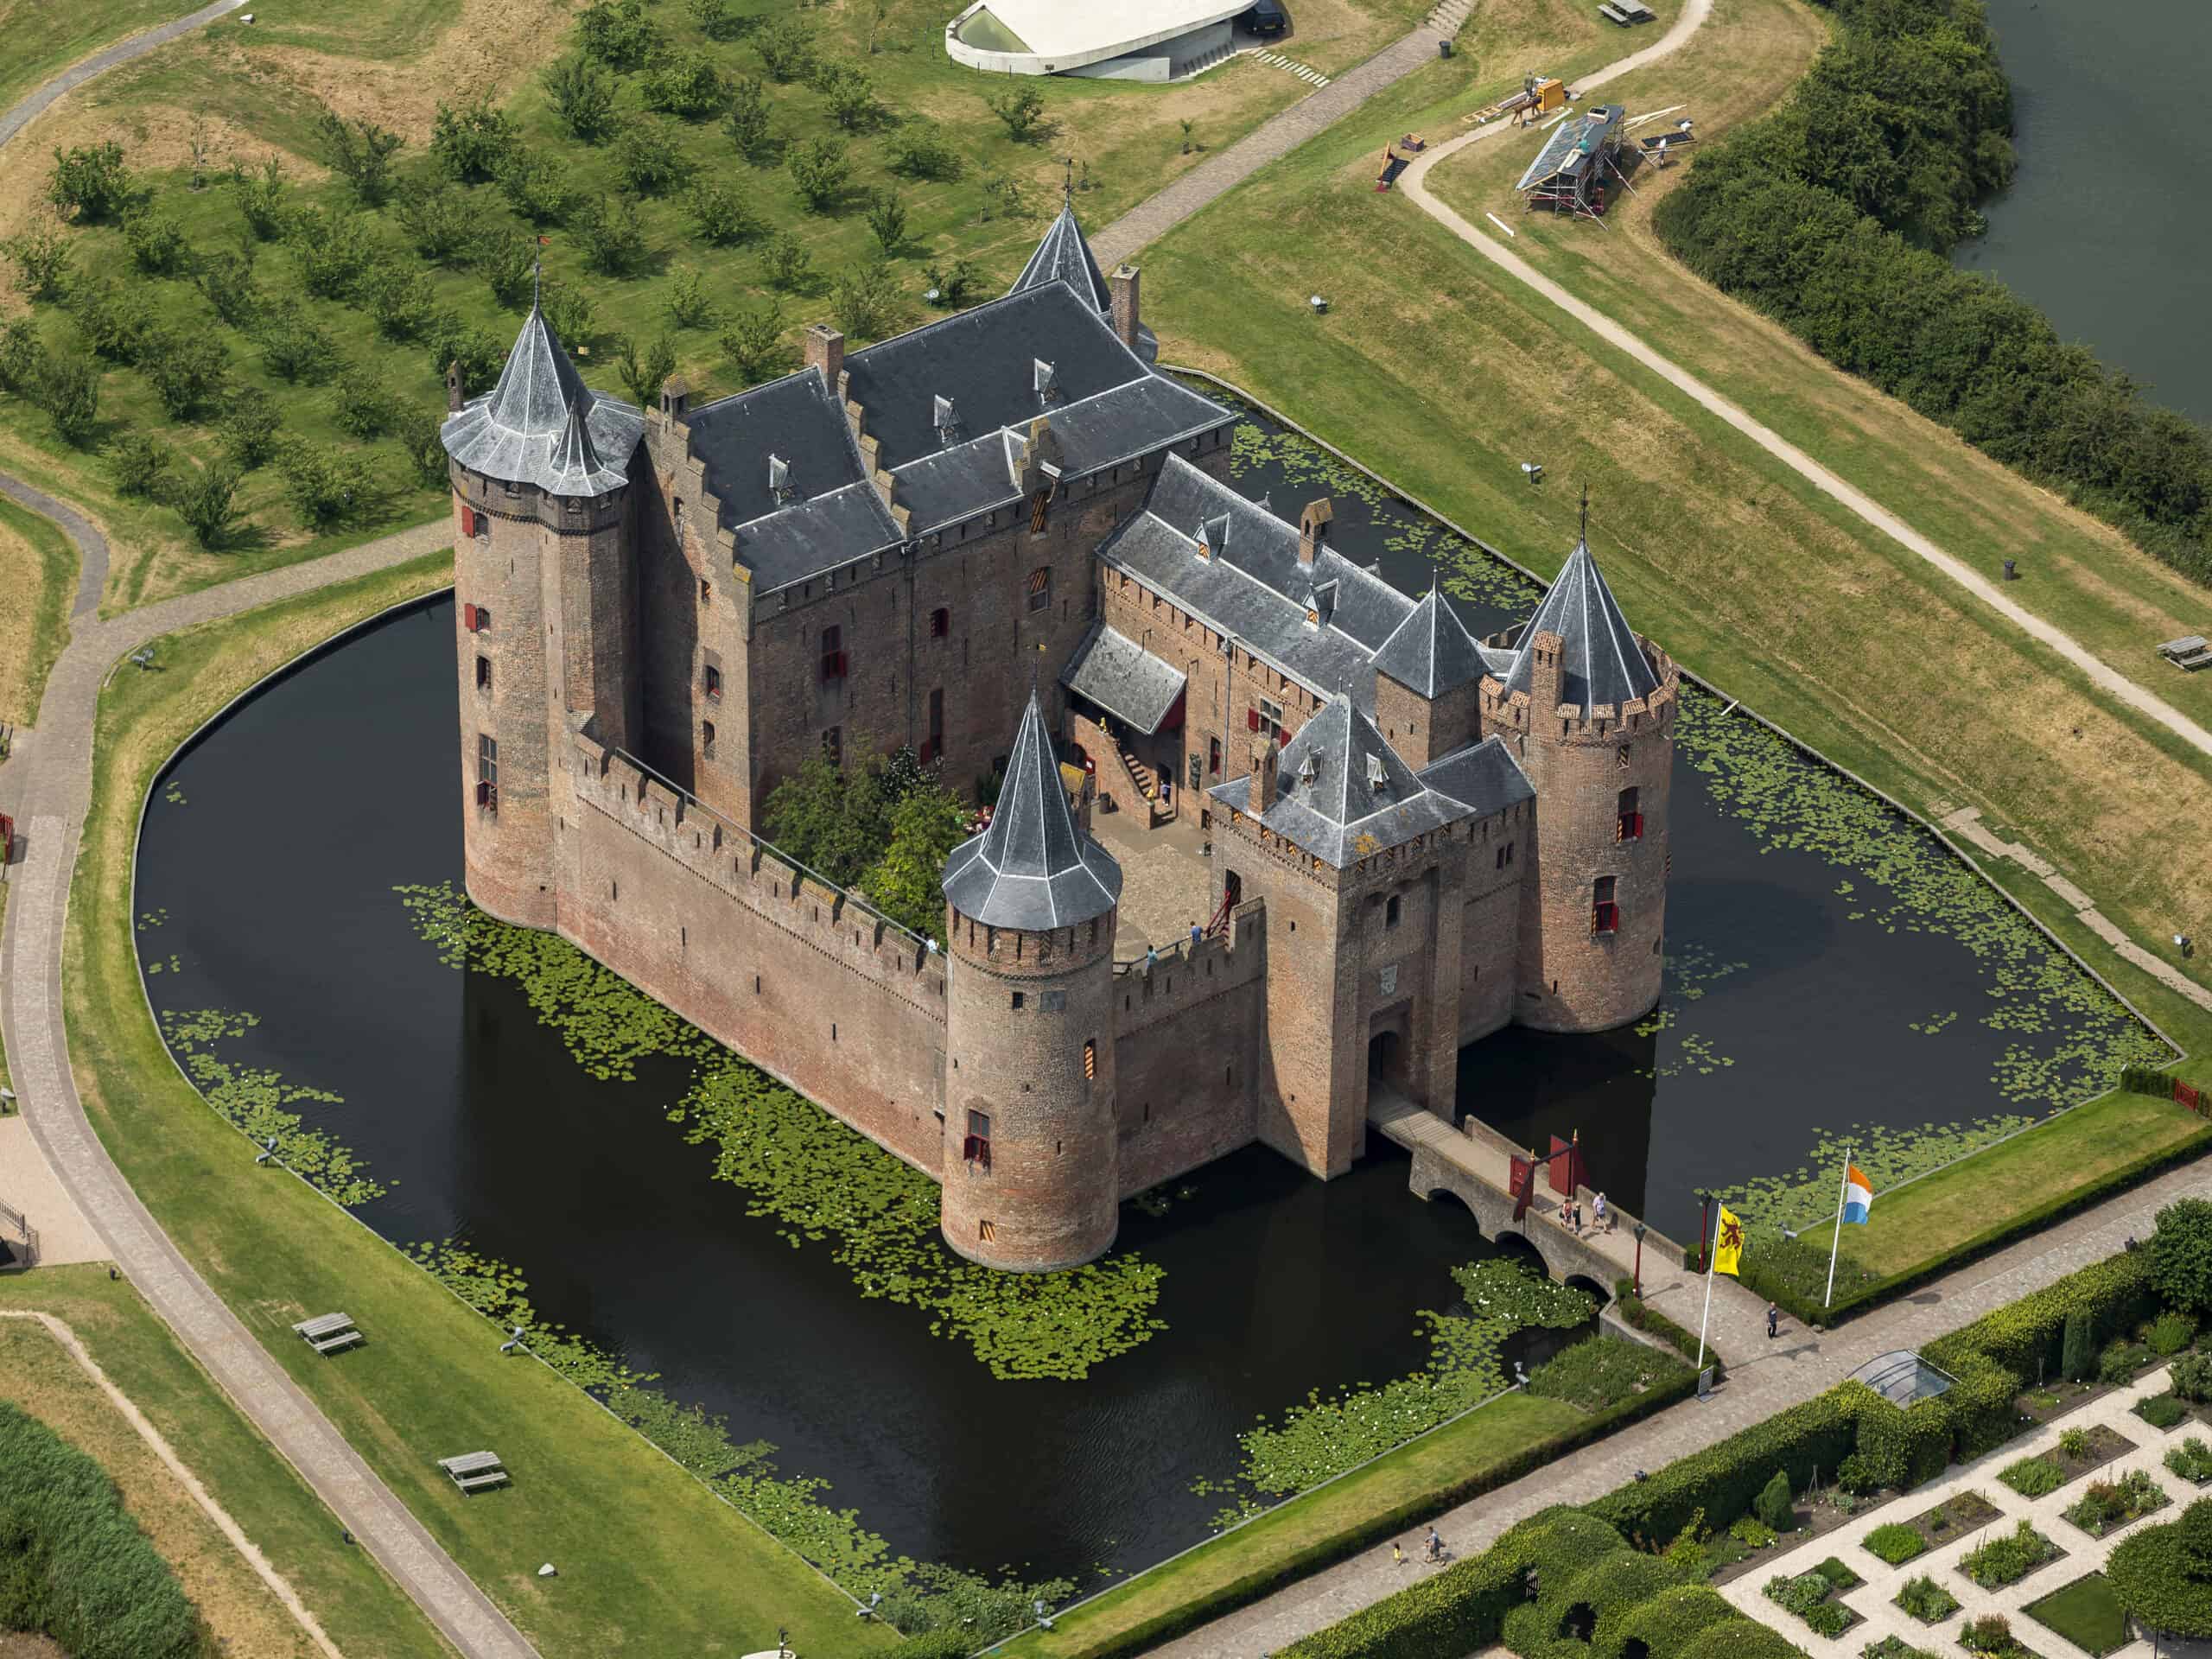 A castle with multiple layers of protection, including a moat.